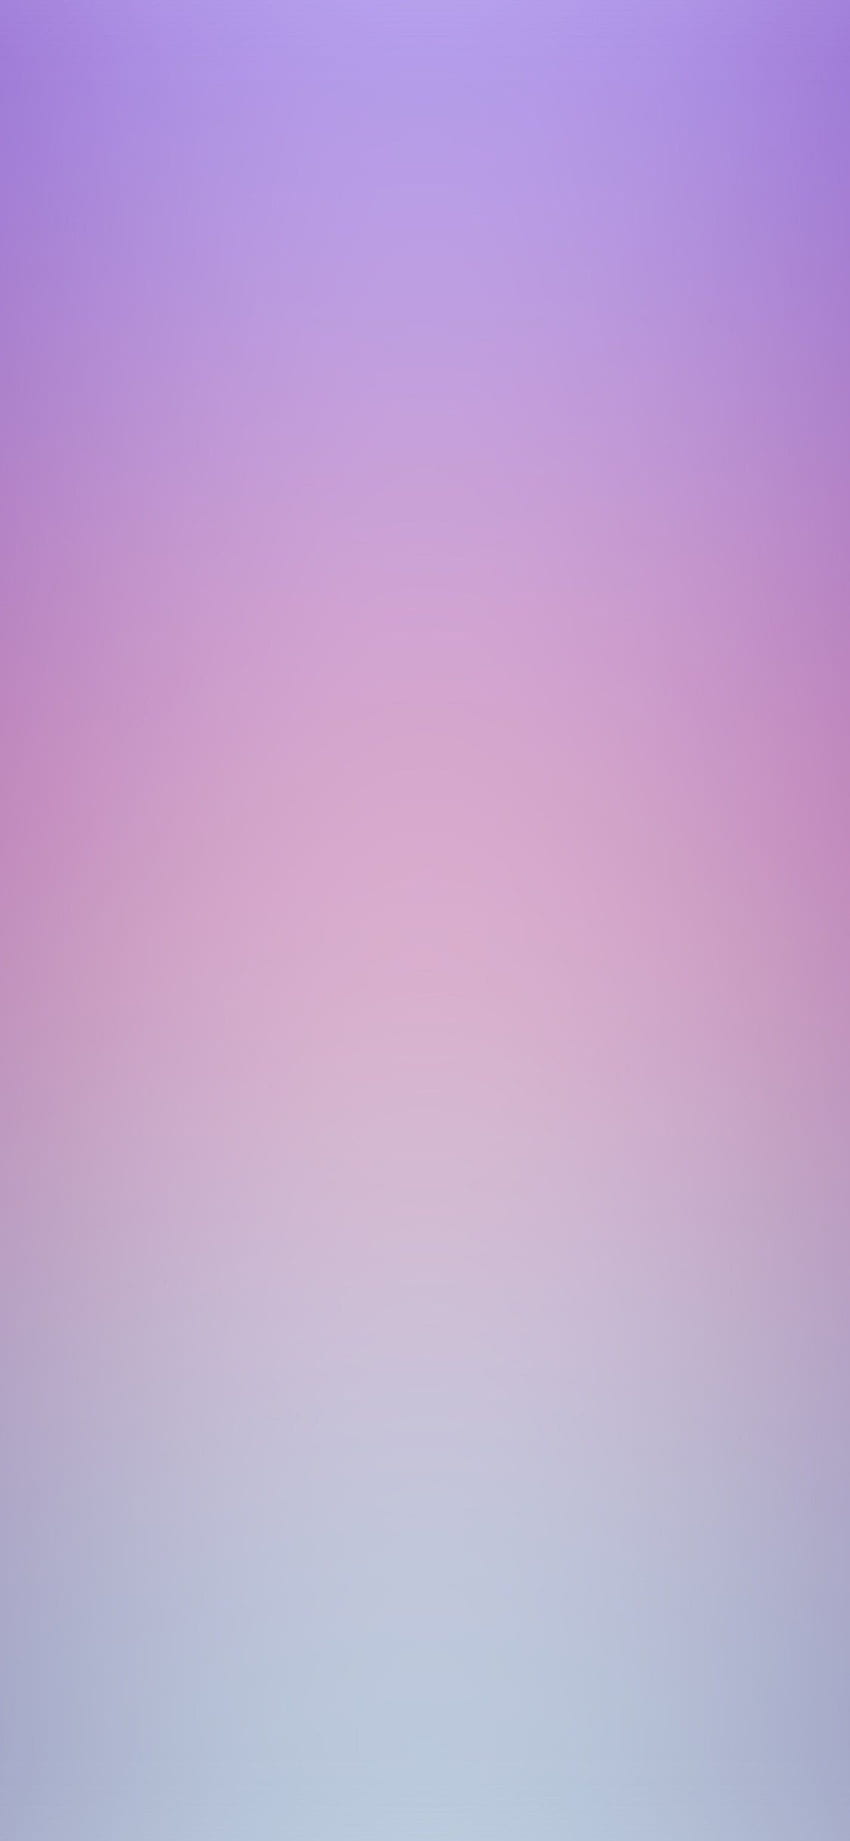 Download premium image of Watercolor background lilac wallpaper image by  Nunny about lilac  Purple aesthetic background Purple wallpaper iphone Lilac  background